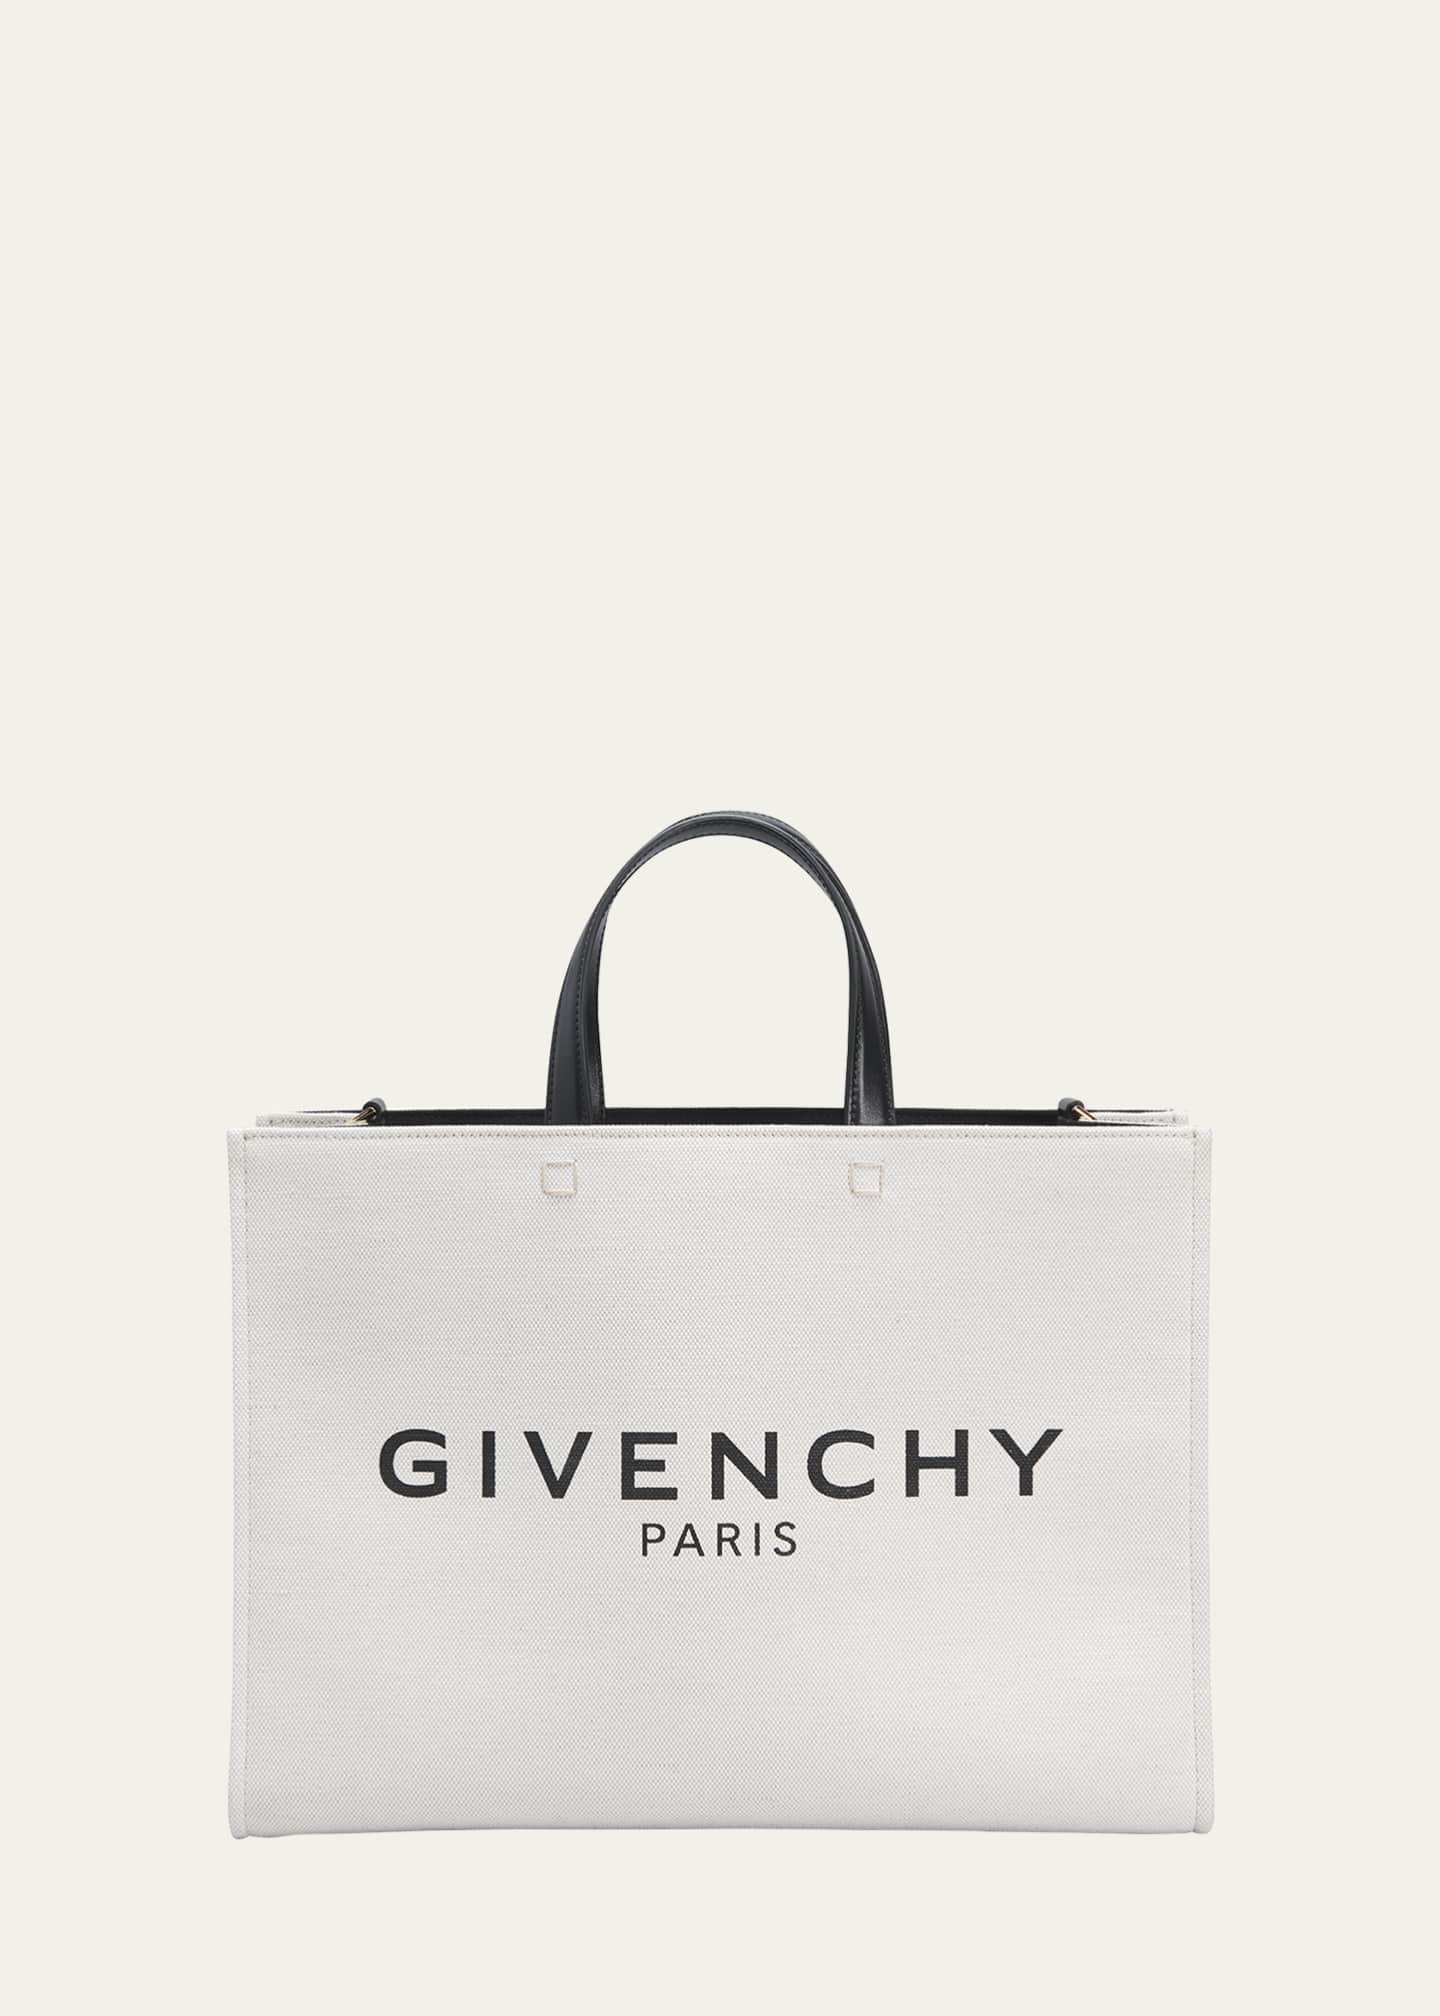 Givenchy Paris Shopping Stock Photo - Download Image Now